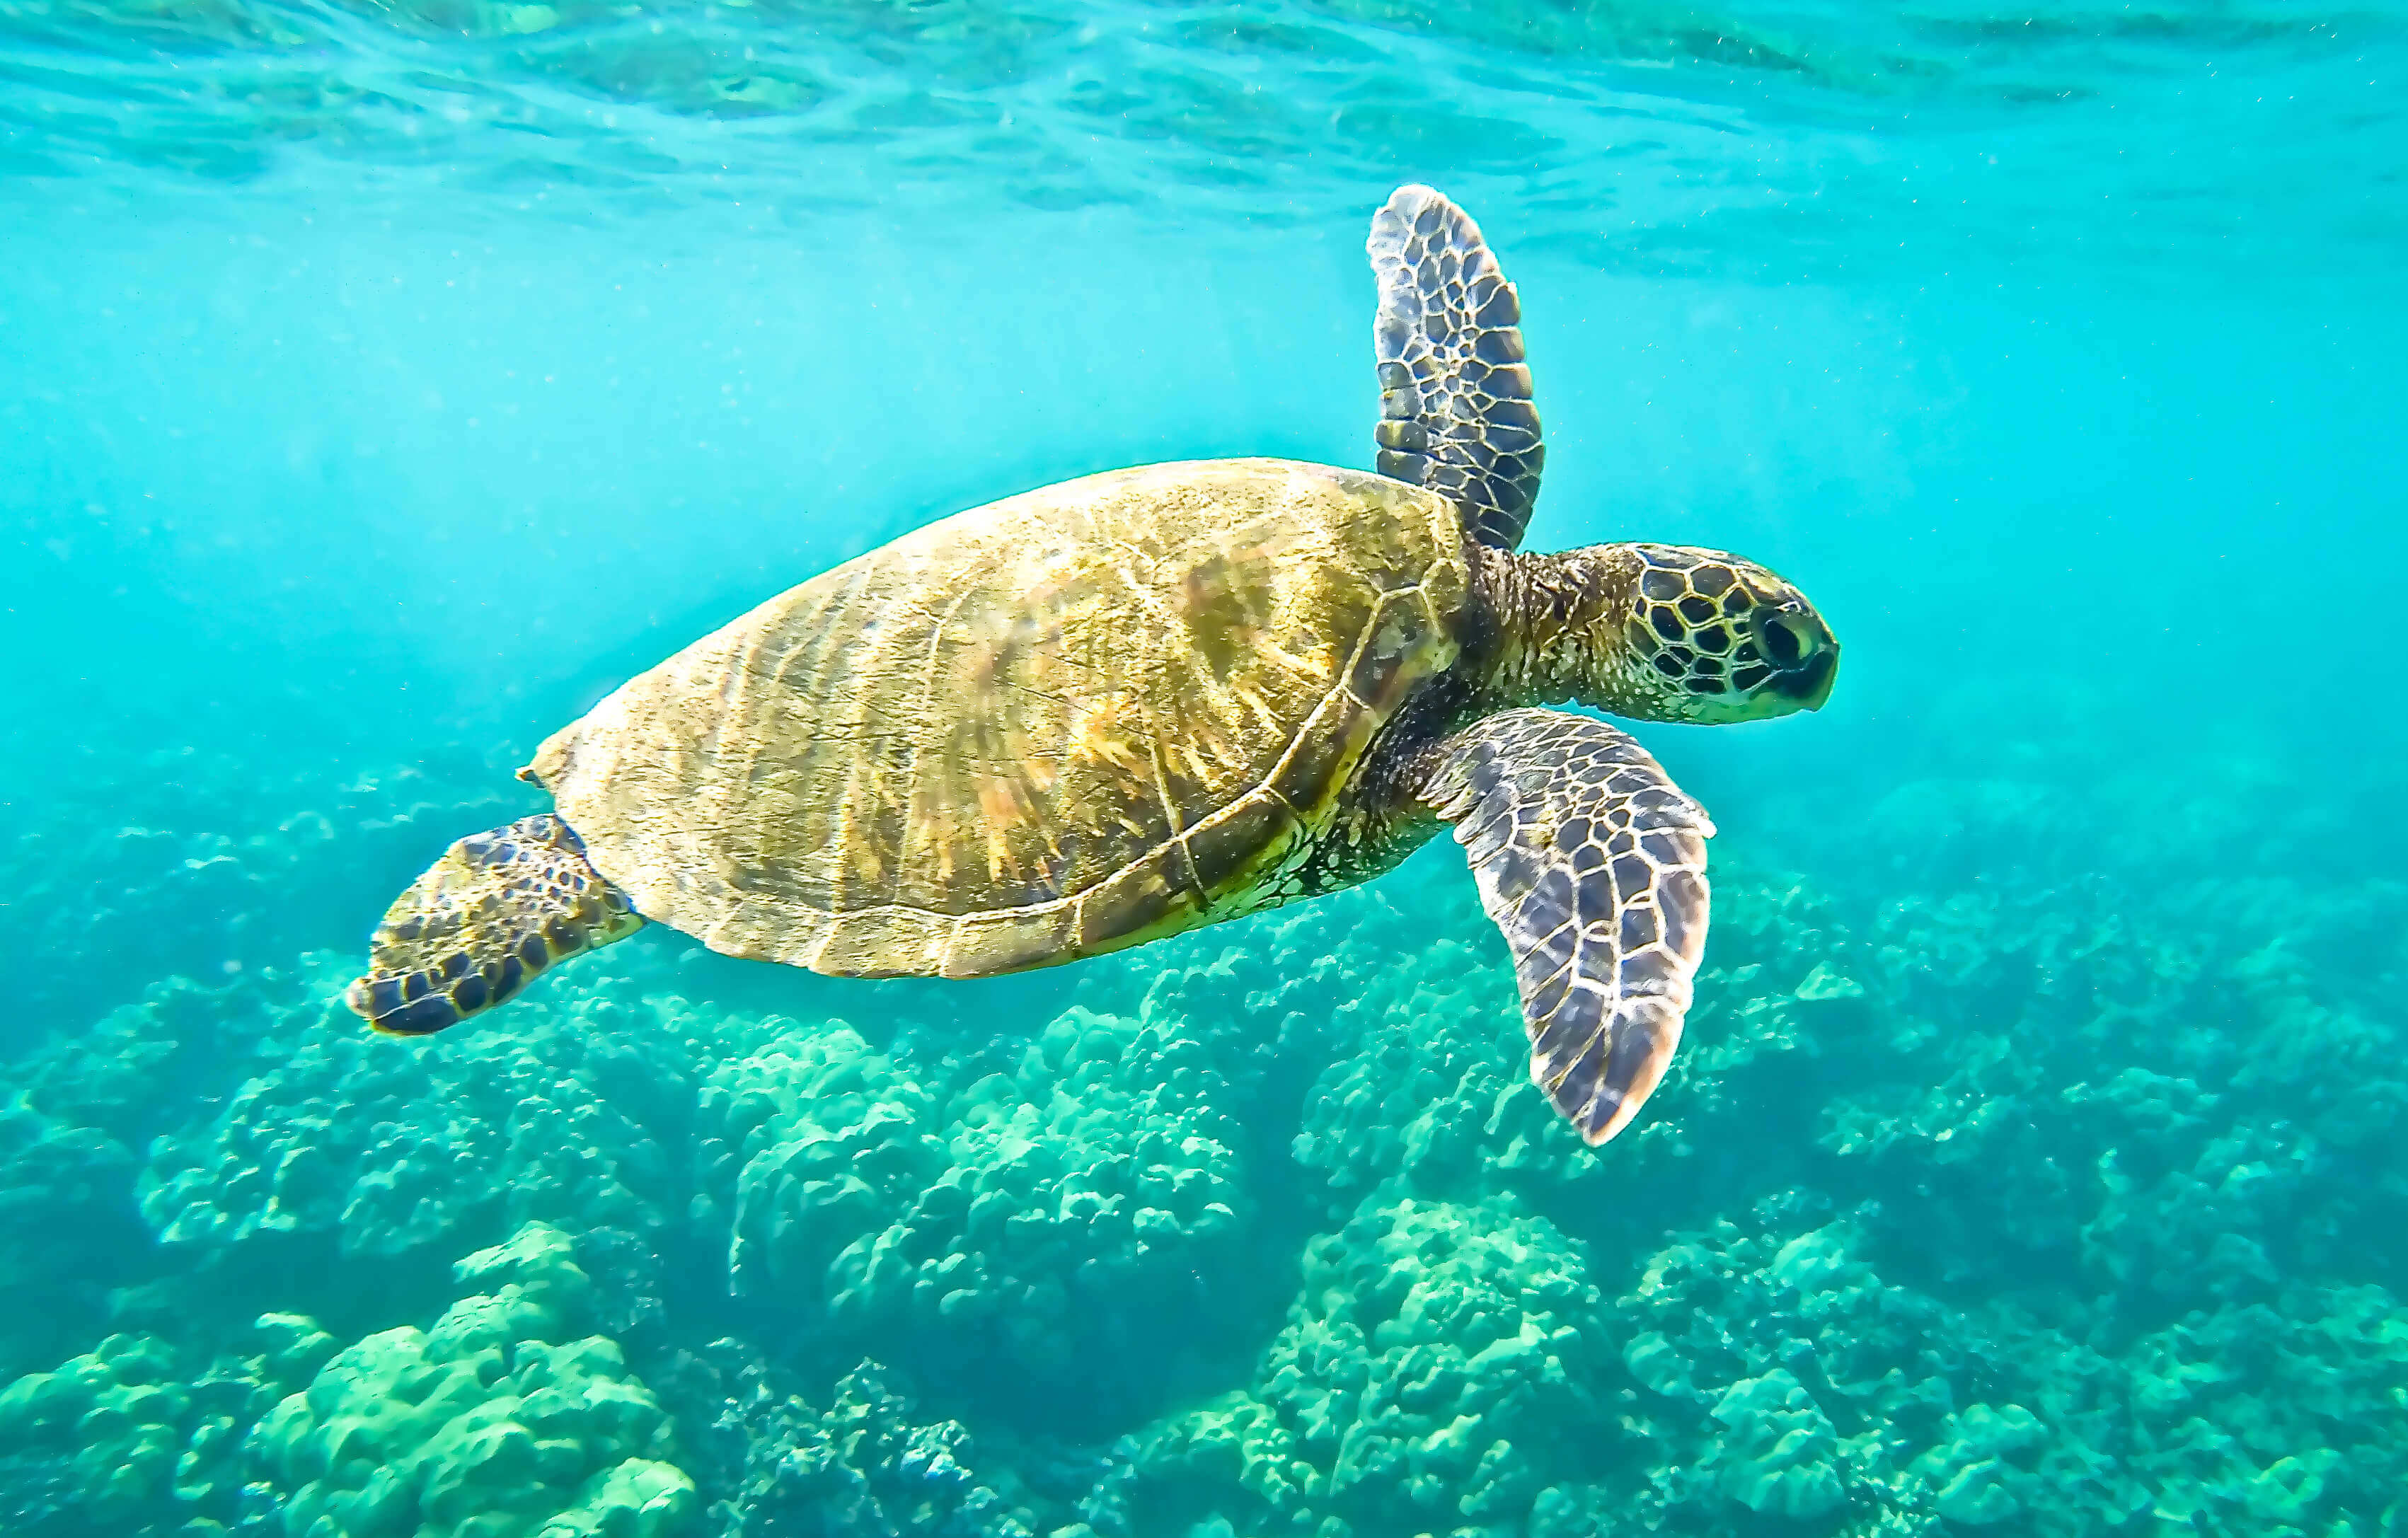 There are two types of turtles in Northern Cyprus; Loggerhead and Green turtles